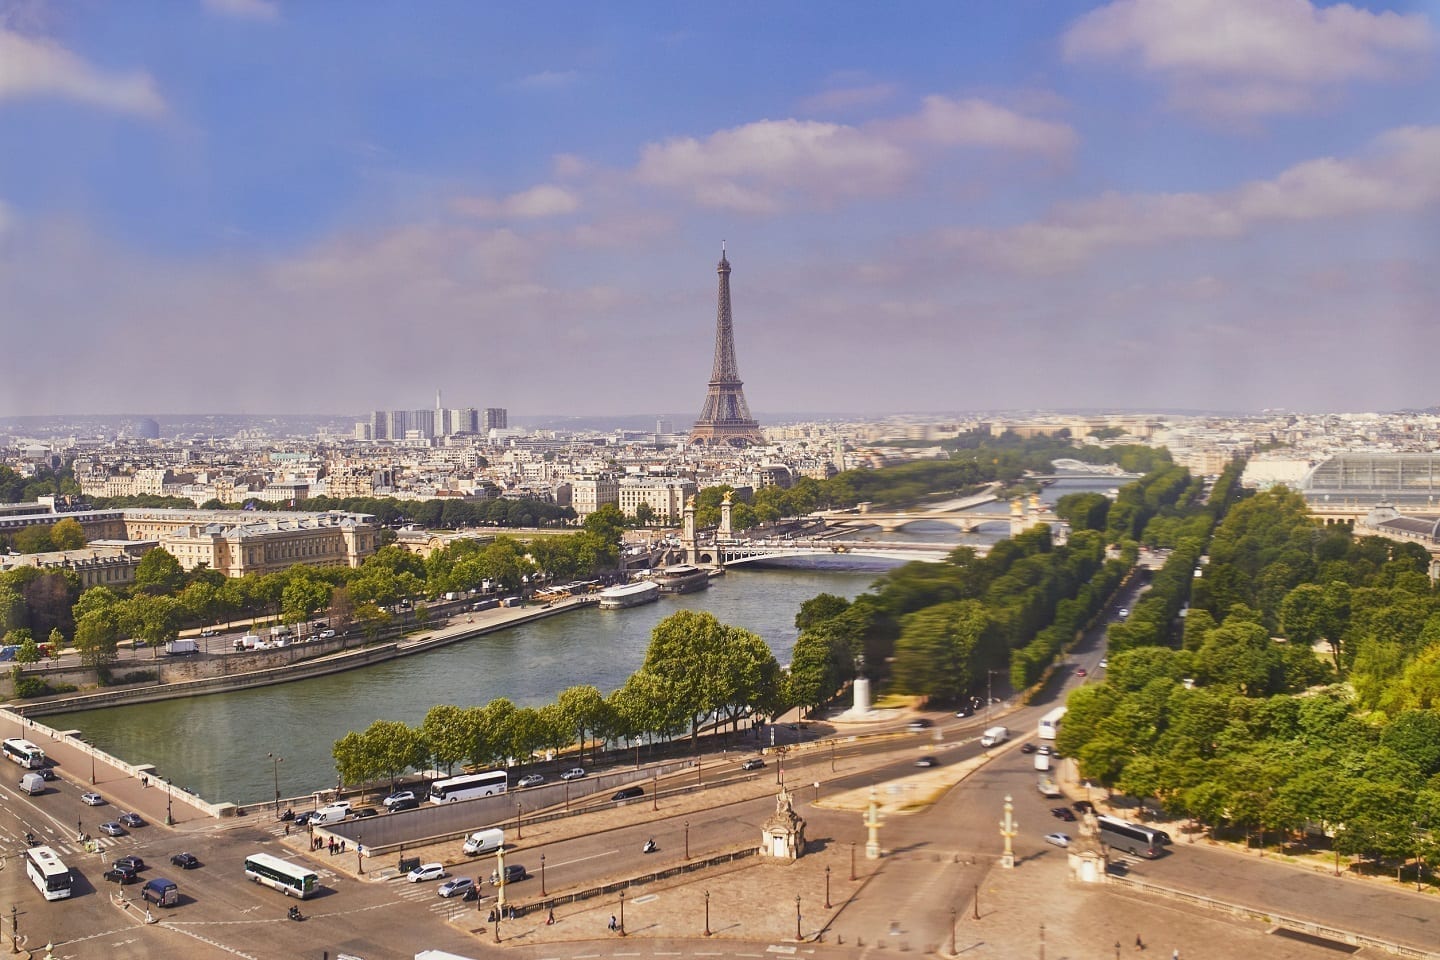 Fantastic Day Trips From Paris. Build it Yourself. Save -60%